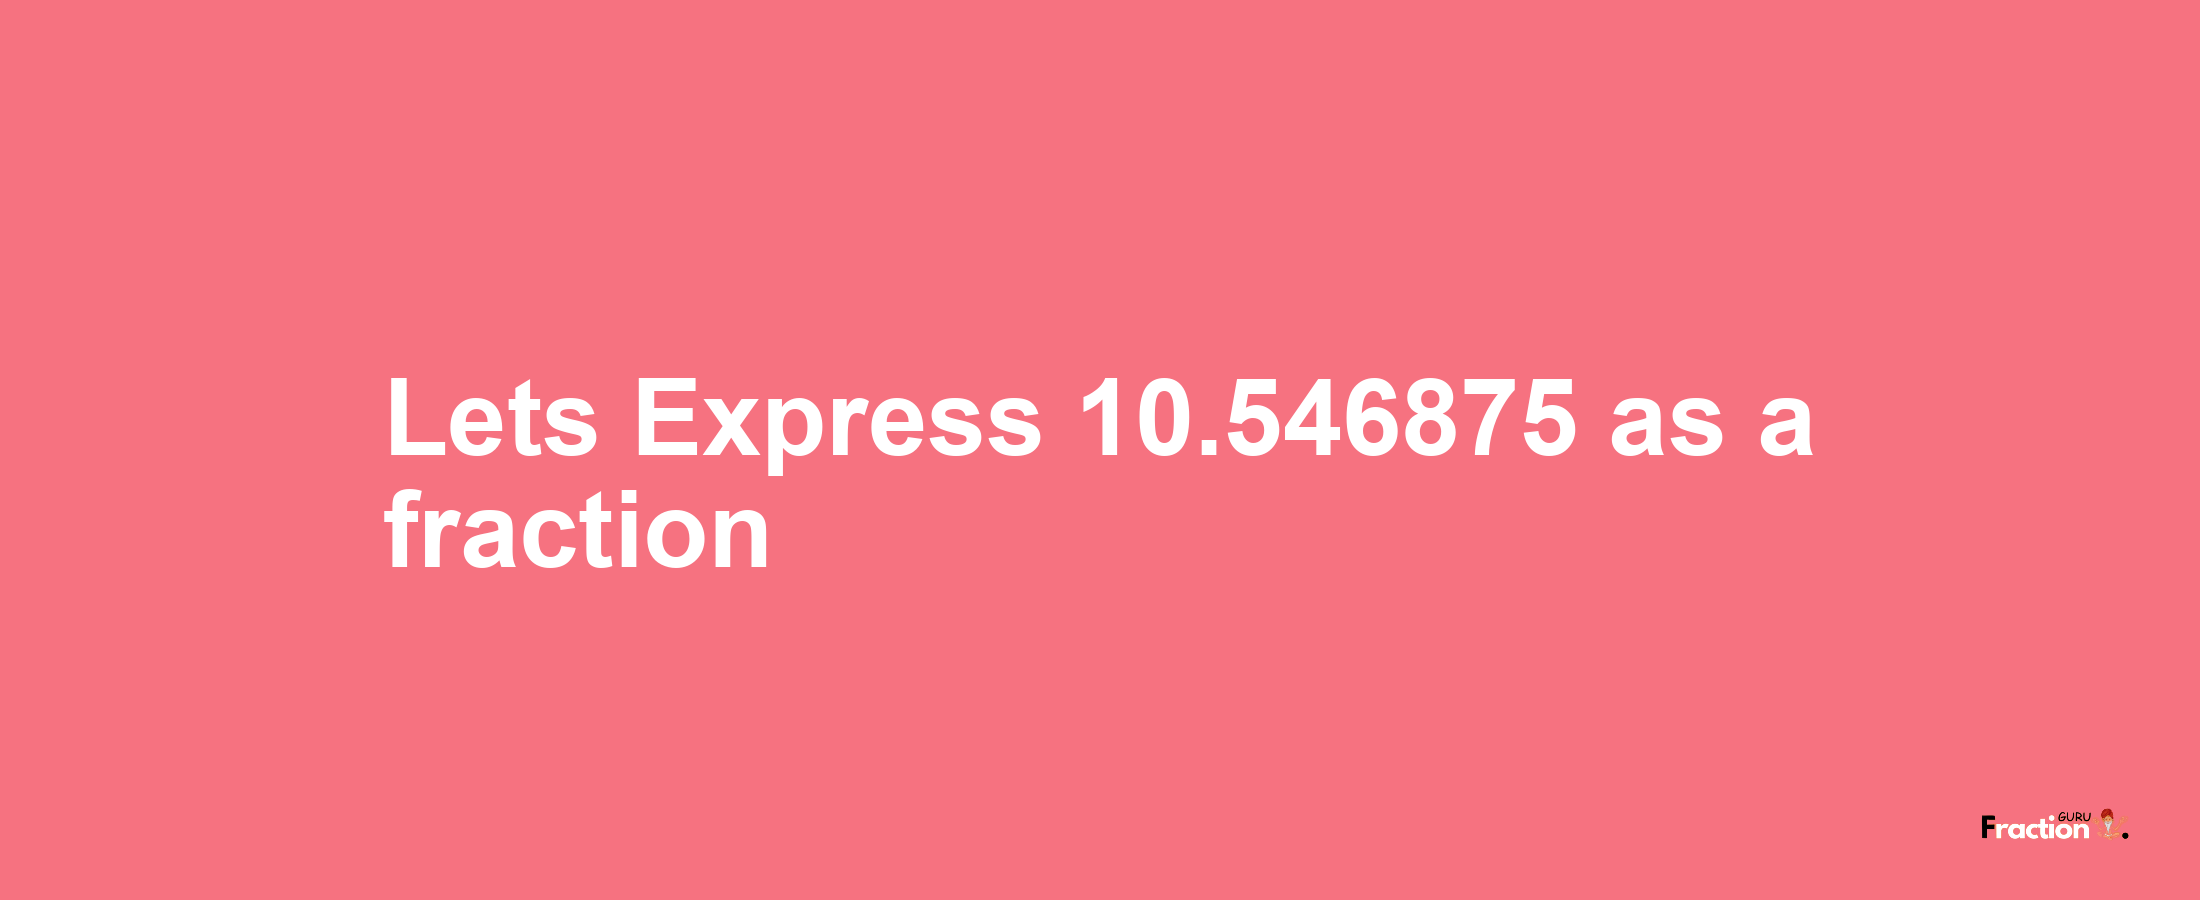 Lets Express 10.546875 as afraction